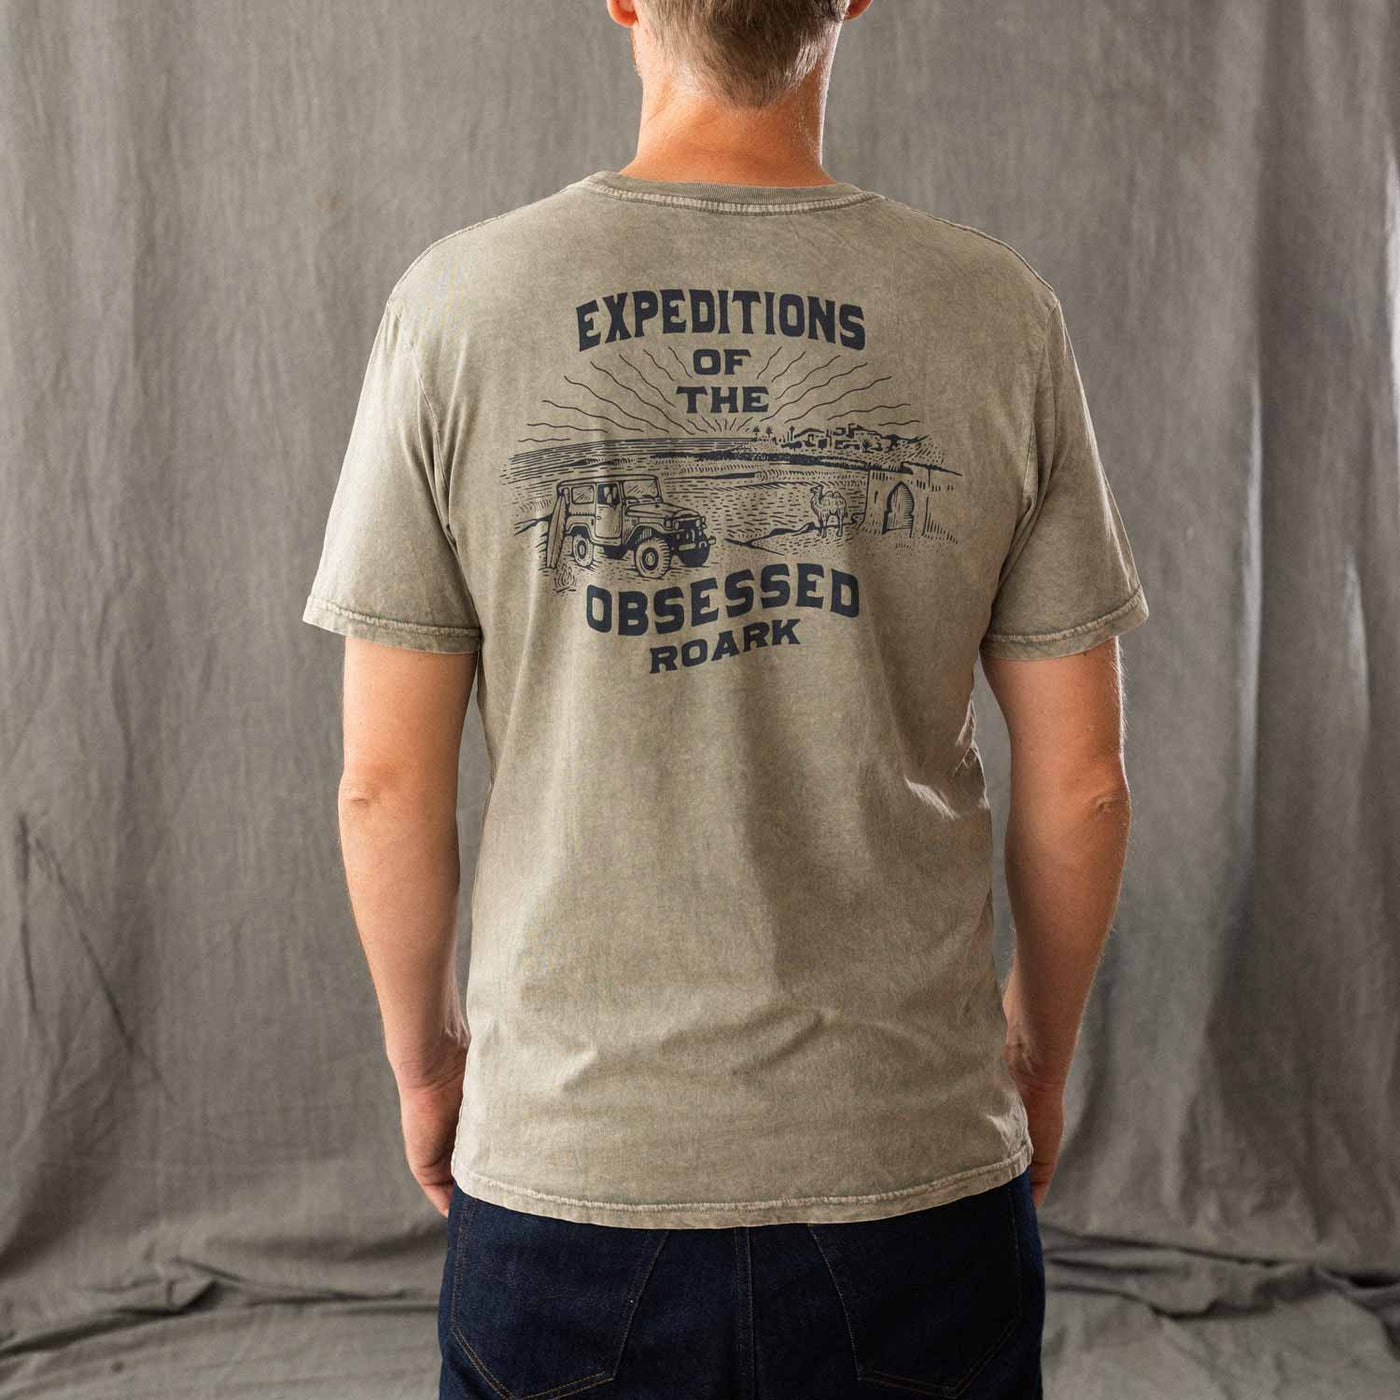 ROARK - T-shirt - Expeditions of the obsessed - grå washed